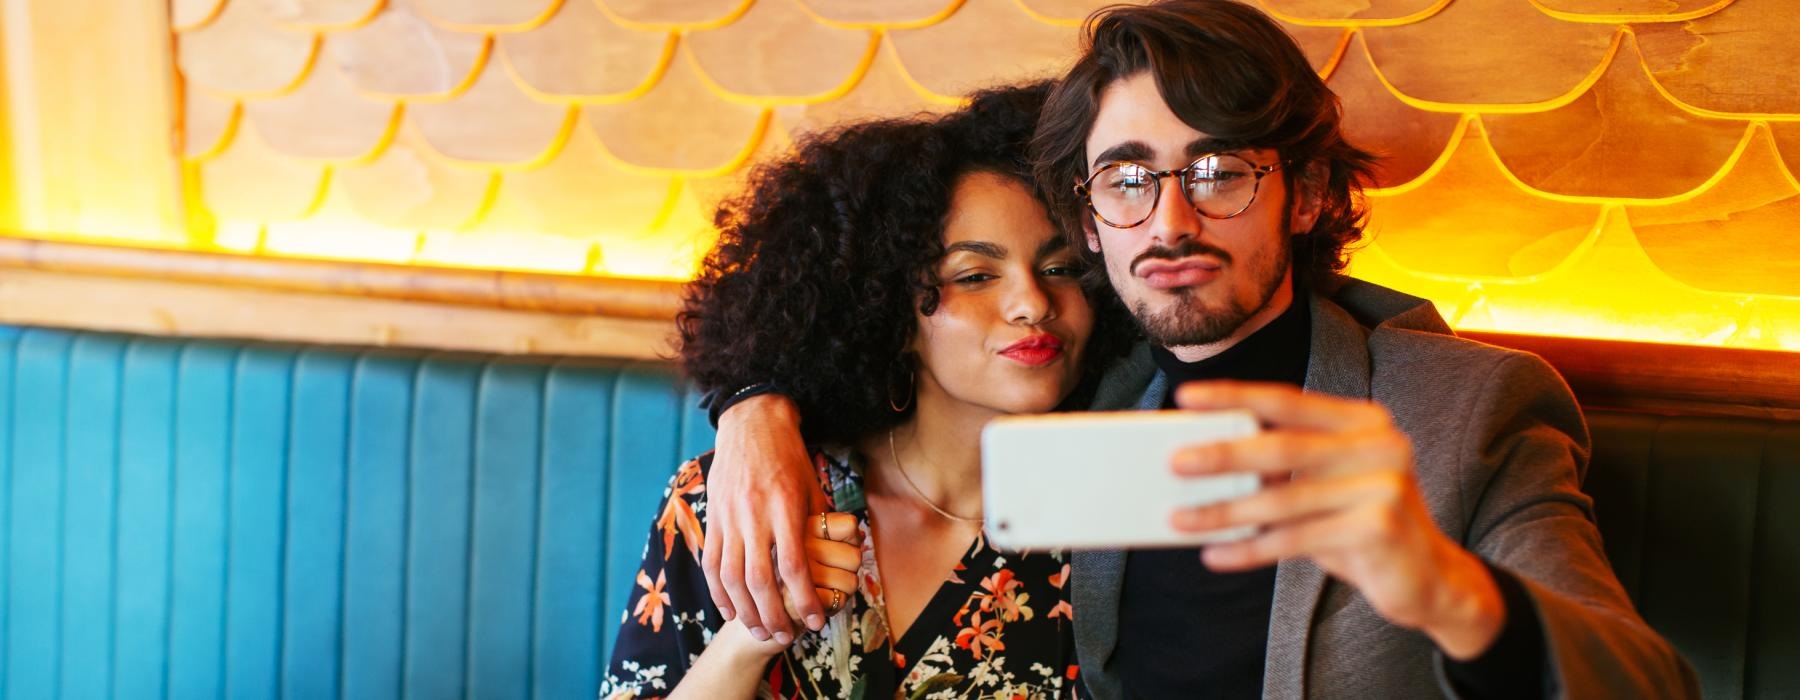 a man and woman taking a picture together